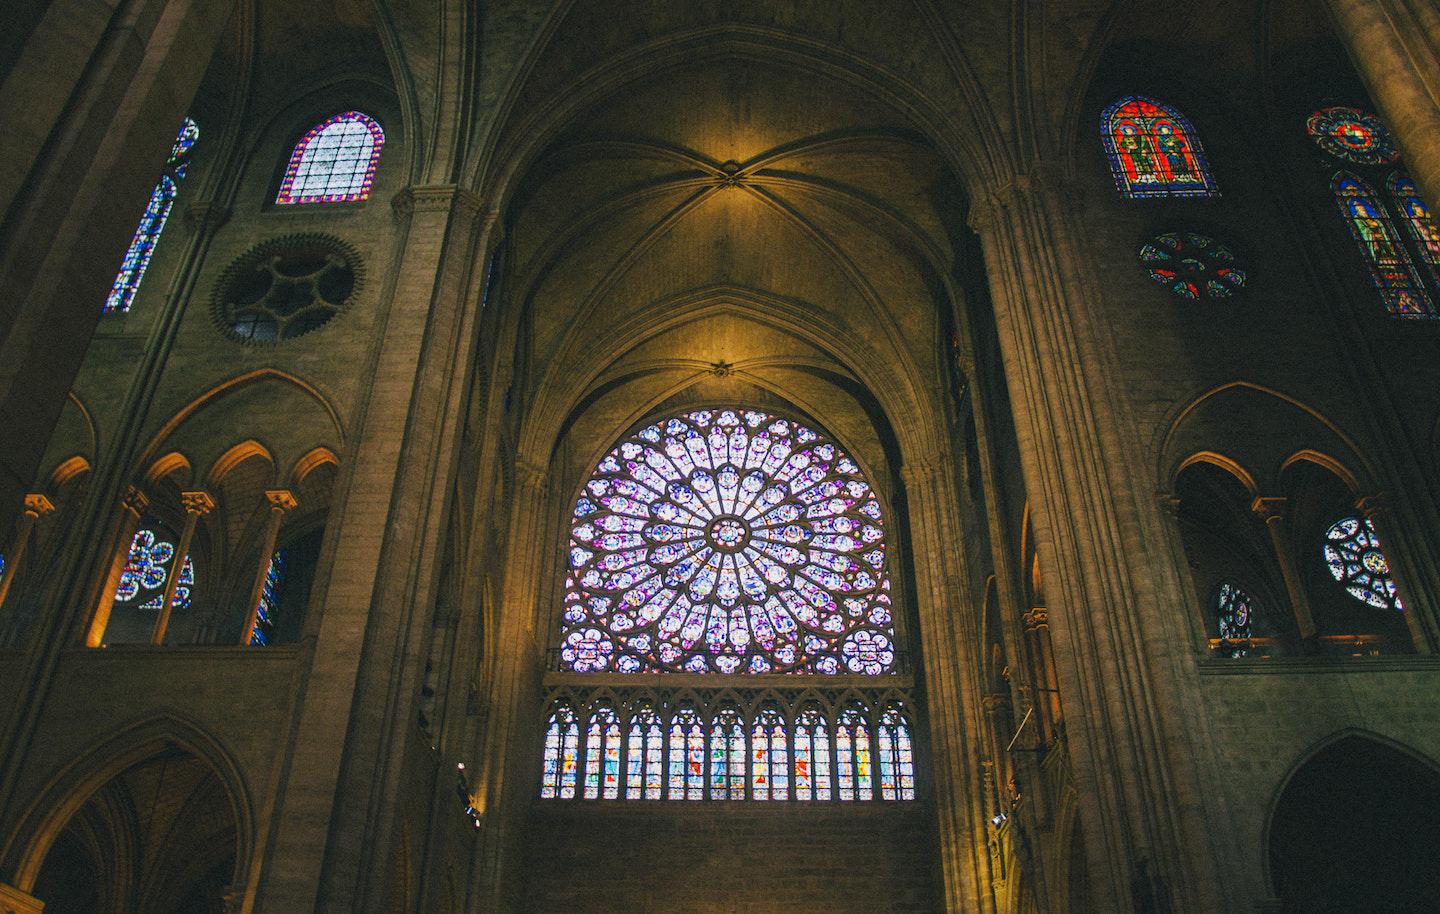 The cathedral's three rose windows were constructed in the 13th century (Photo via Pexels)